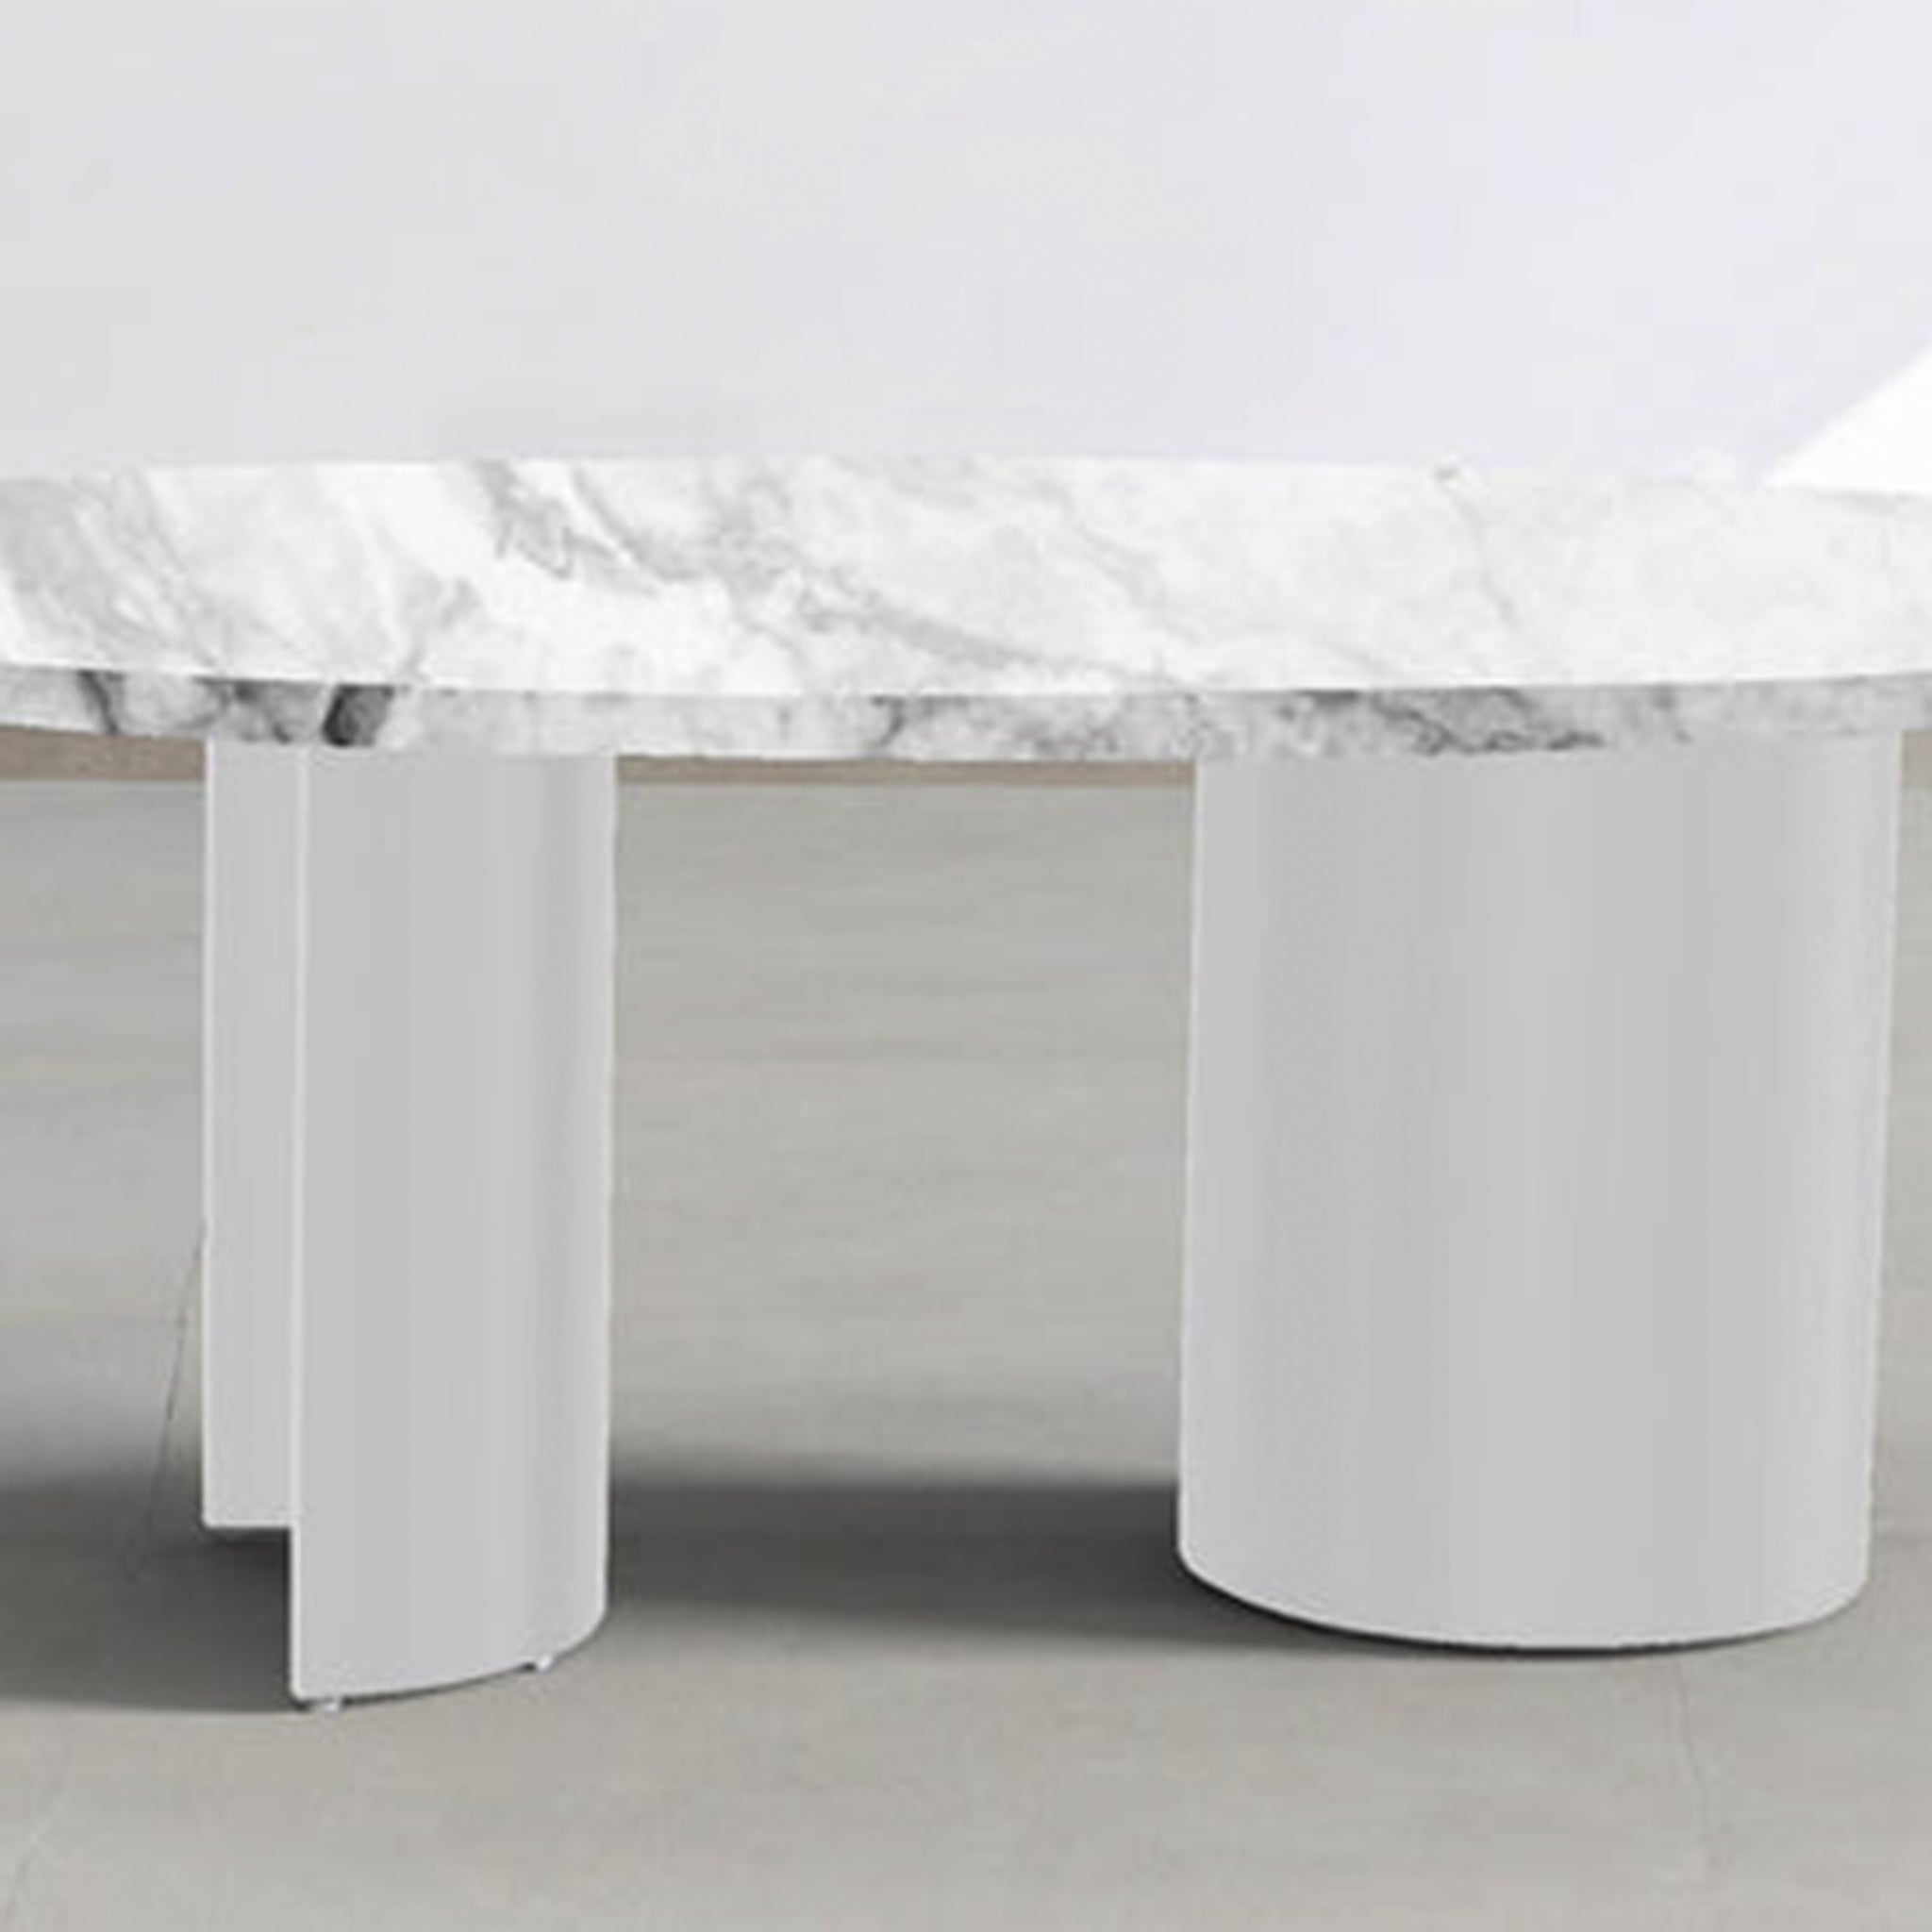 Luxury Coffee Table: Thick marble top adds a touch of sophistication.